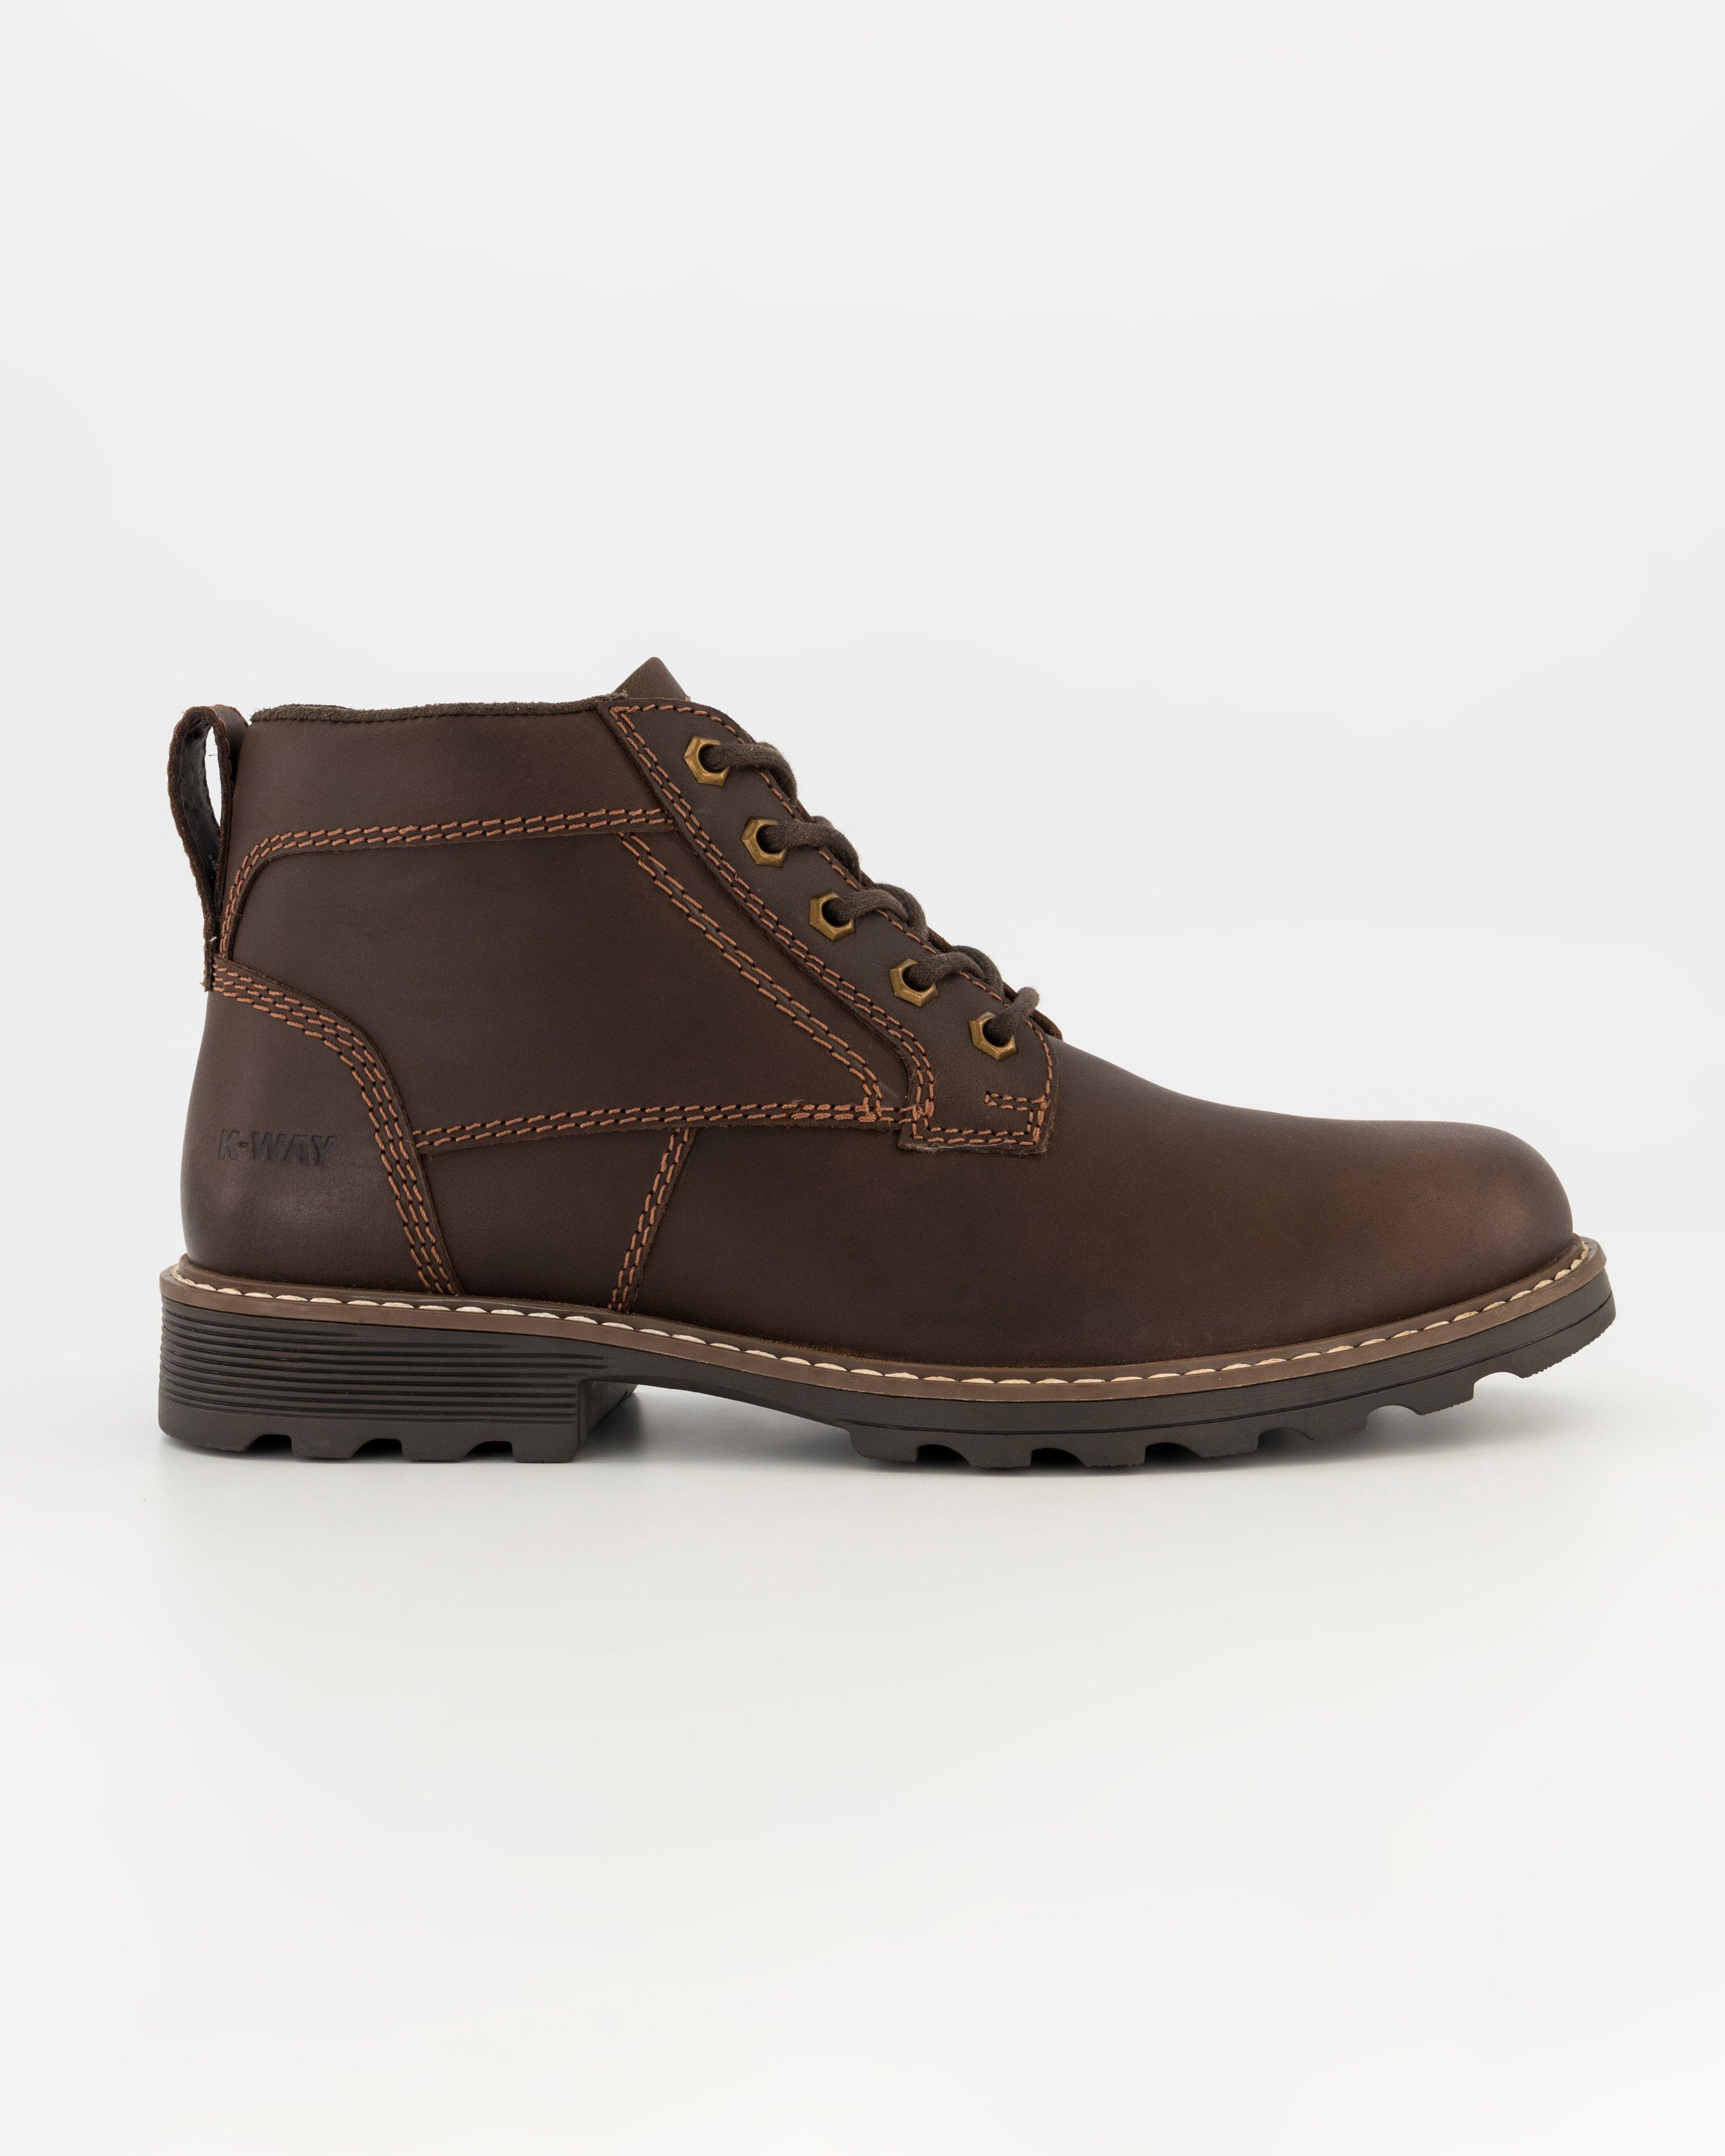 K-Way Elements Men’s Smith Boots -  Chocolate